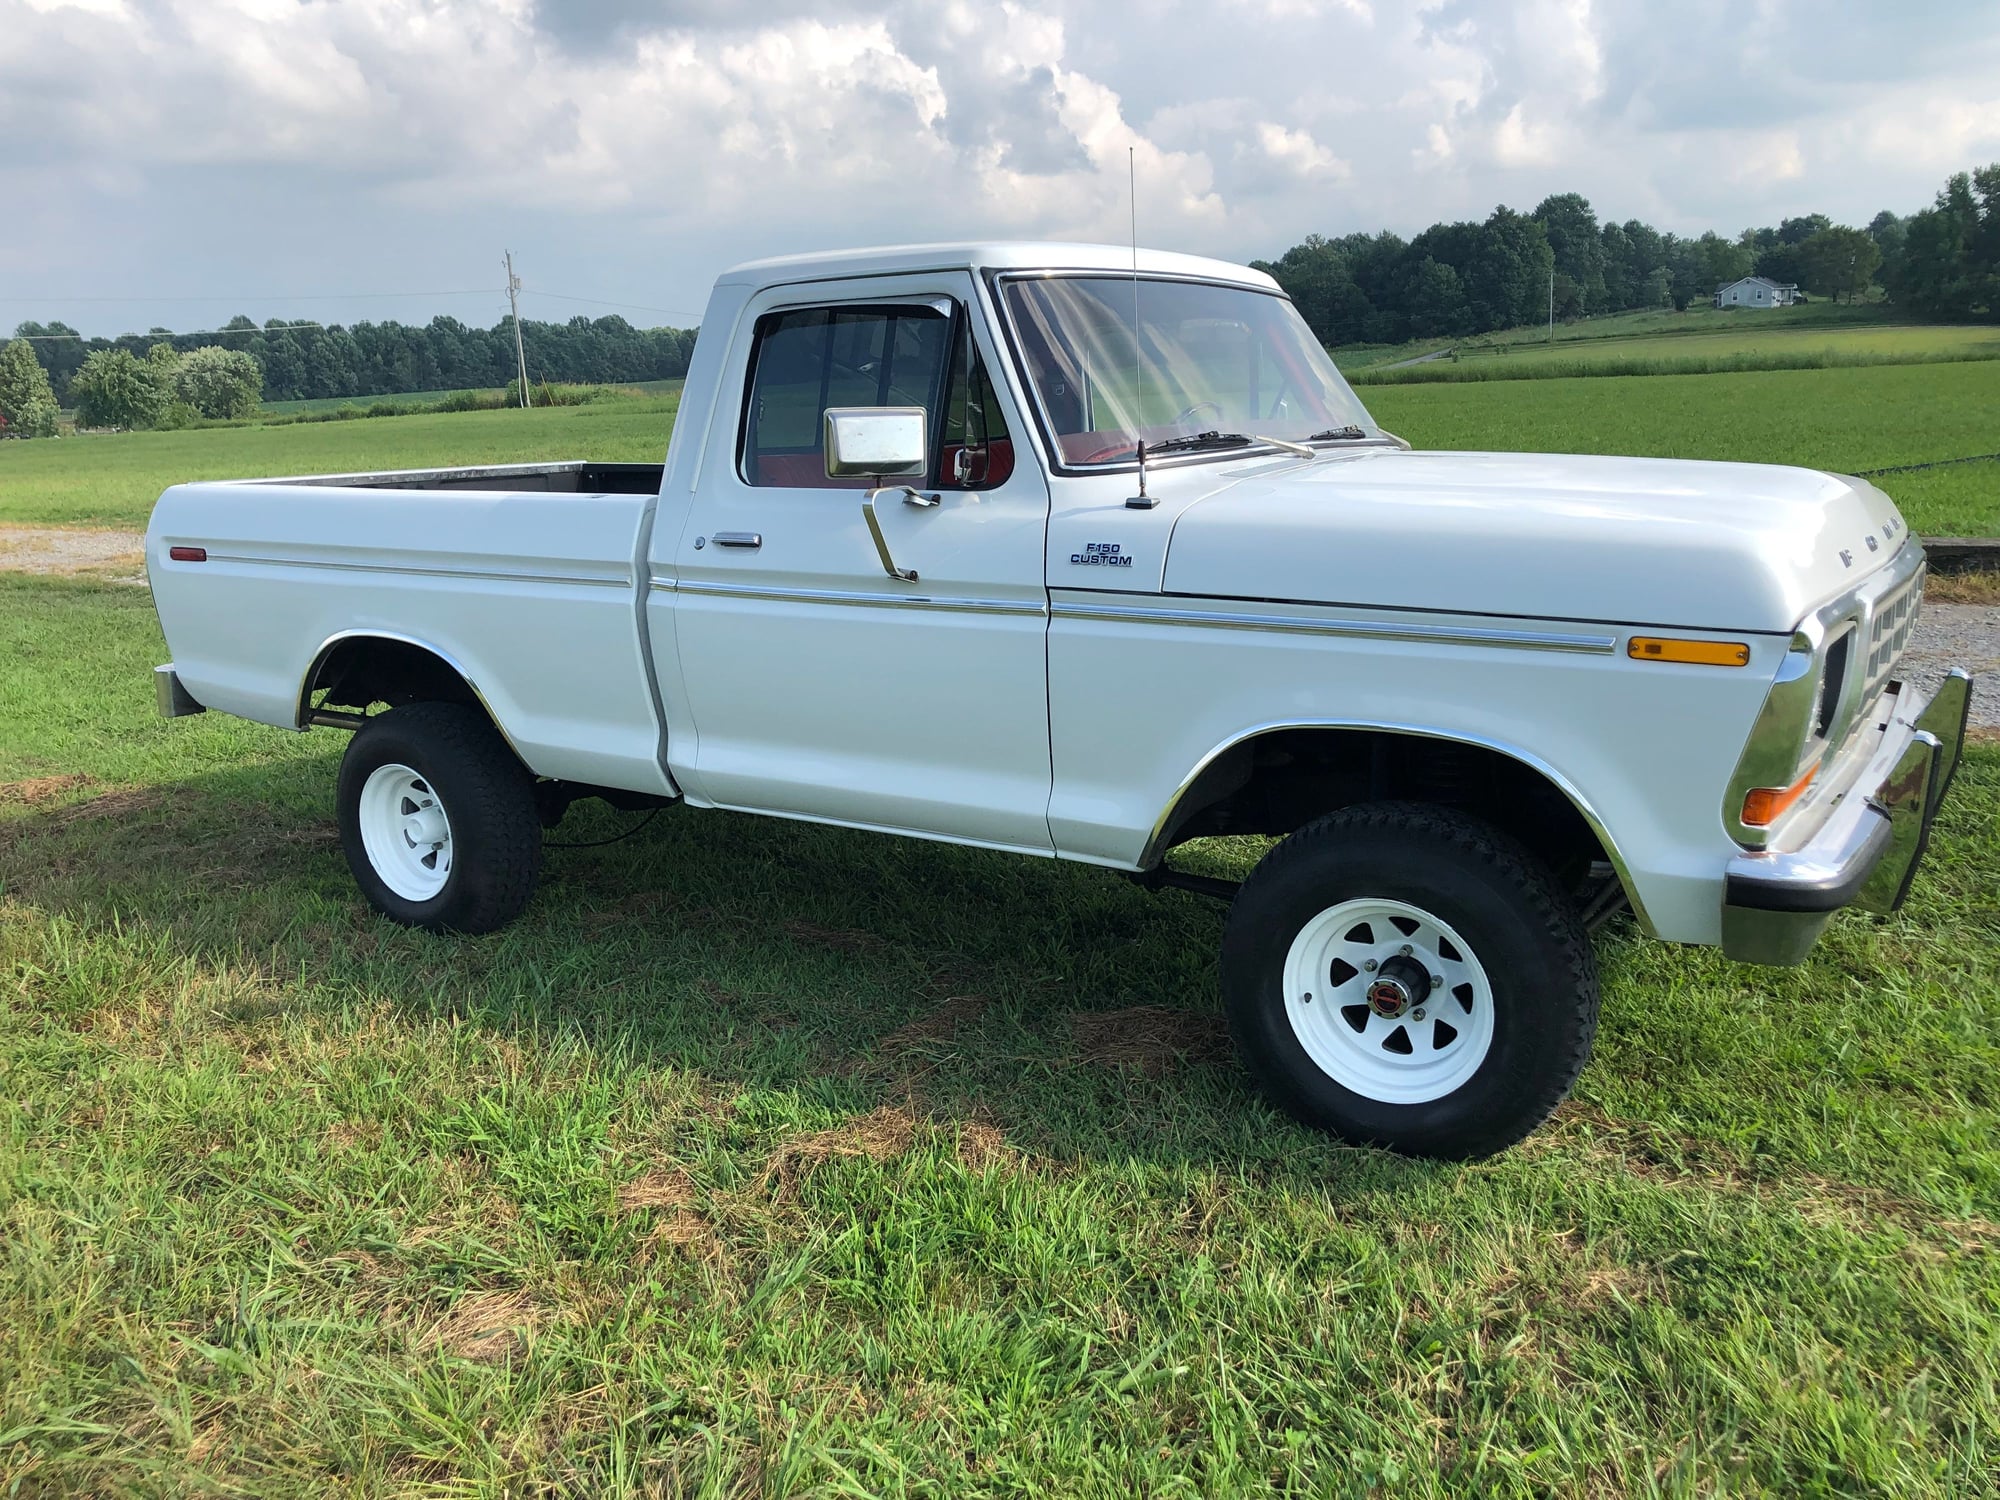 1978 Ford F-150 - 1978 Ford F-150 - Used - VIN f14hube4300 - 124,999 Miles - 8 cyl - 4WD - Manual - Truck - White - Gallatin, TN 37066, United States